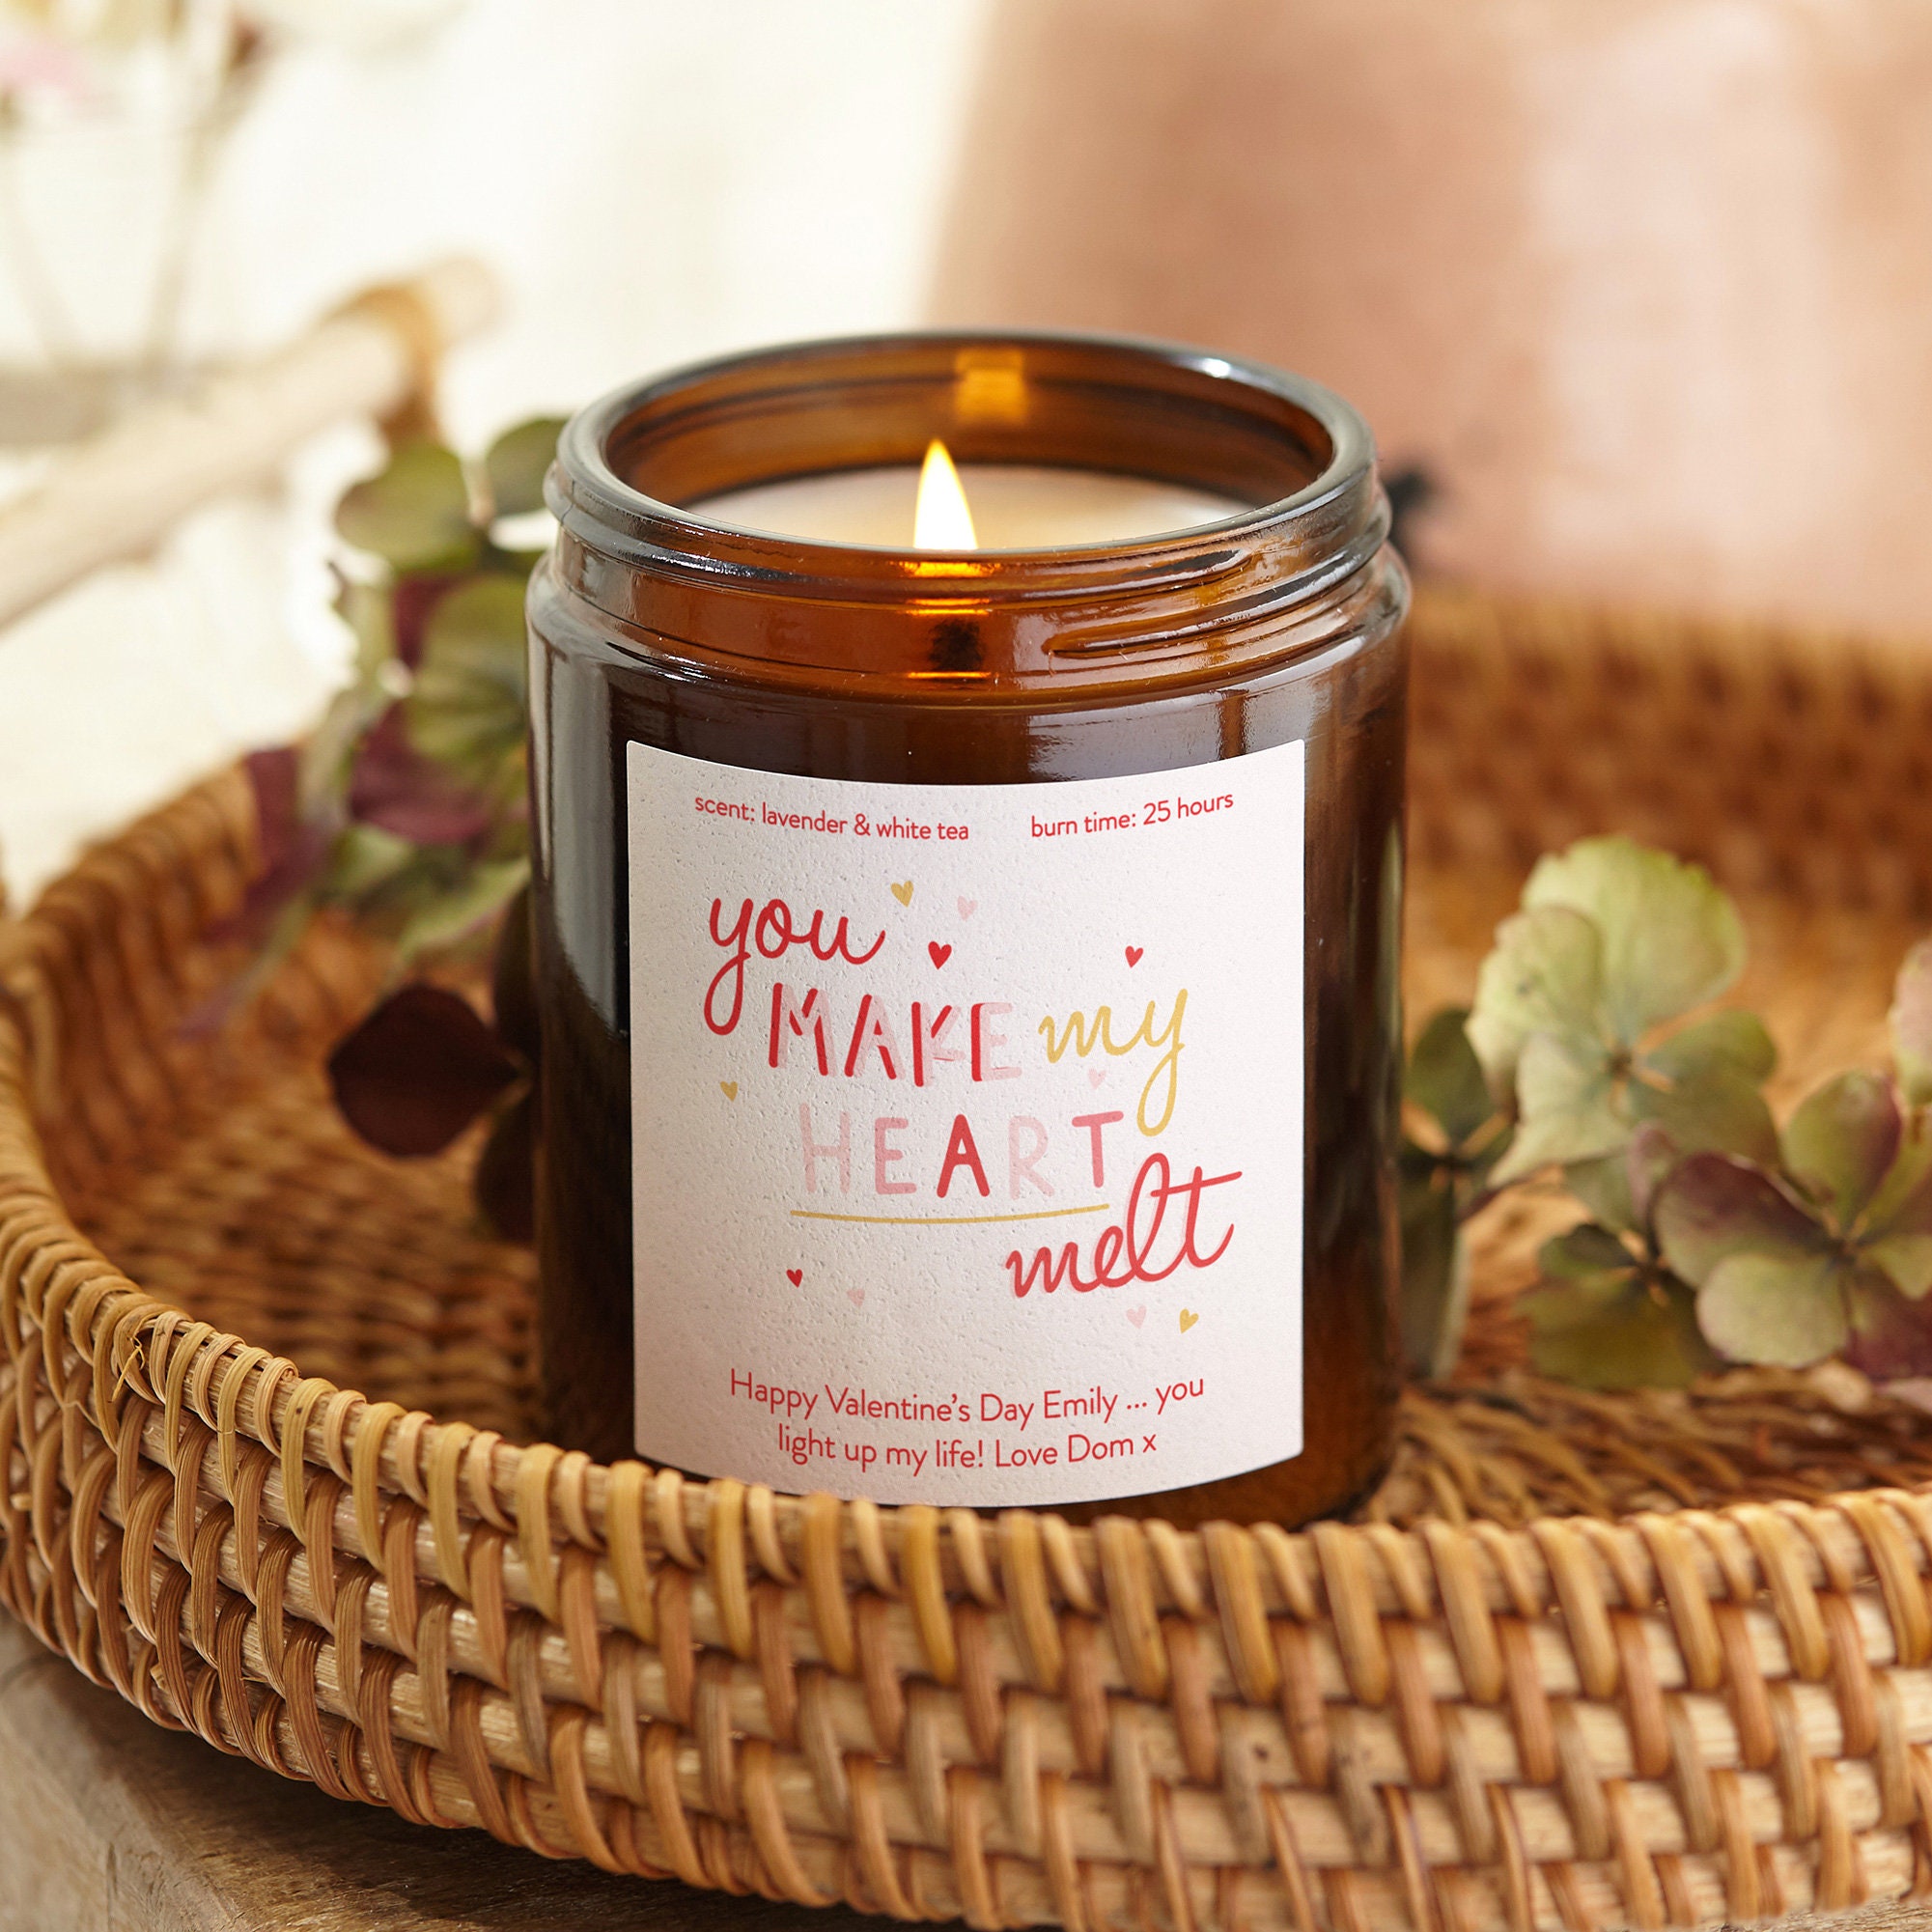 Green Your Valentine's Day: DIY Soy Candles - The Green Life